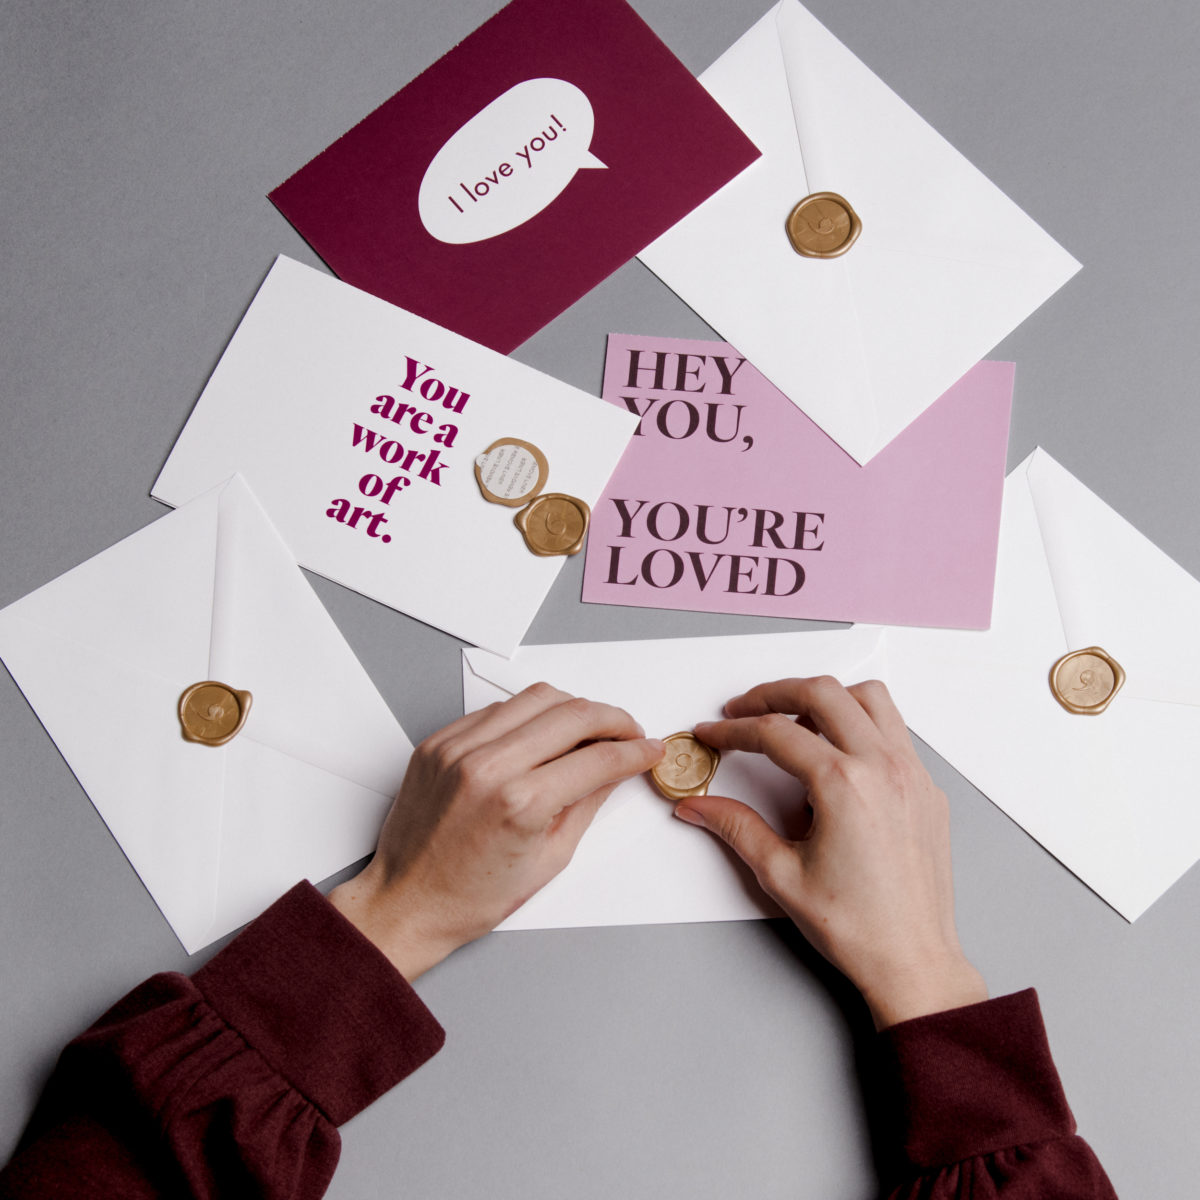 Hands touching a wax seal on an envelope atop of a stack of cards and envelopes